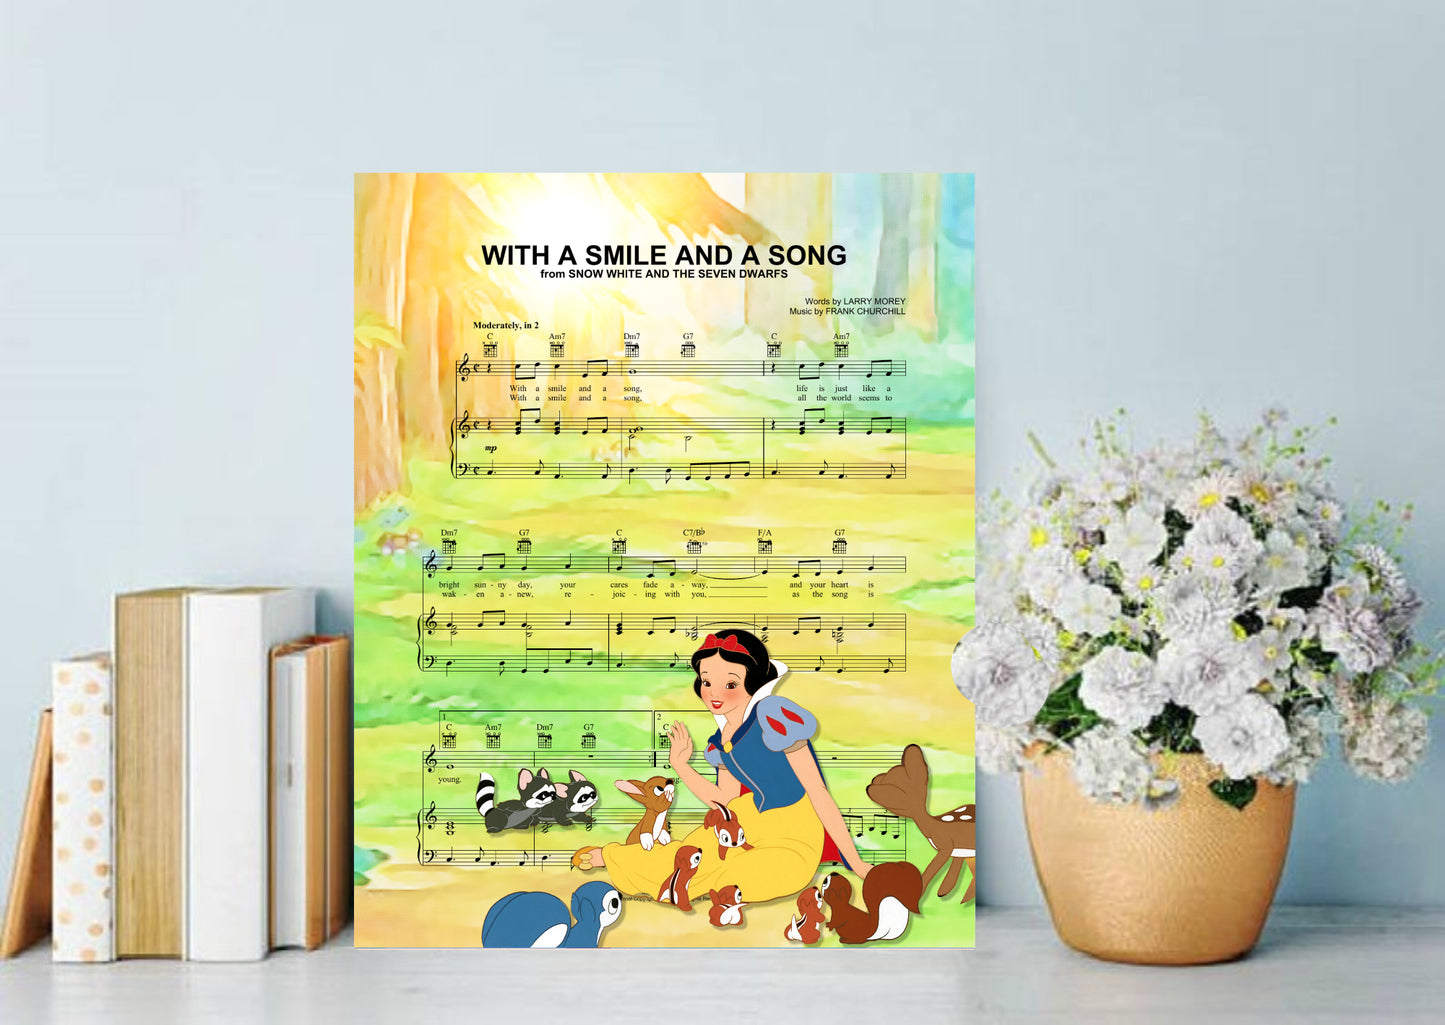 Snow White With a Smile and a Song Sheet Music